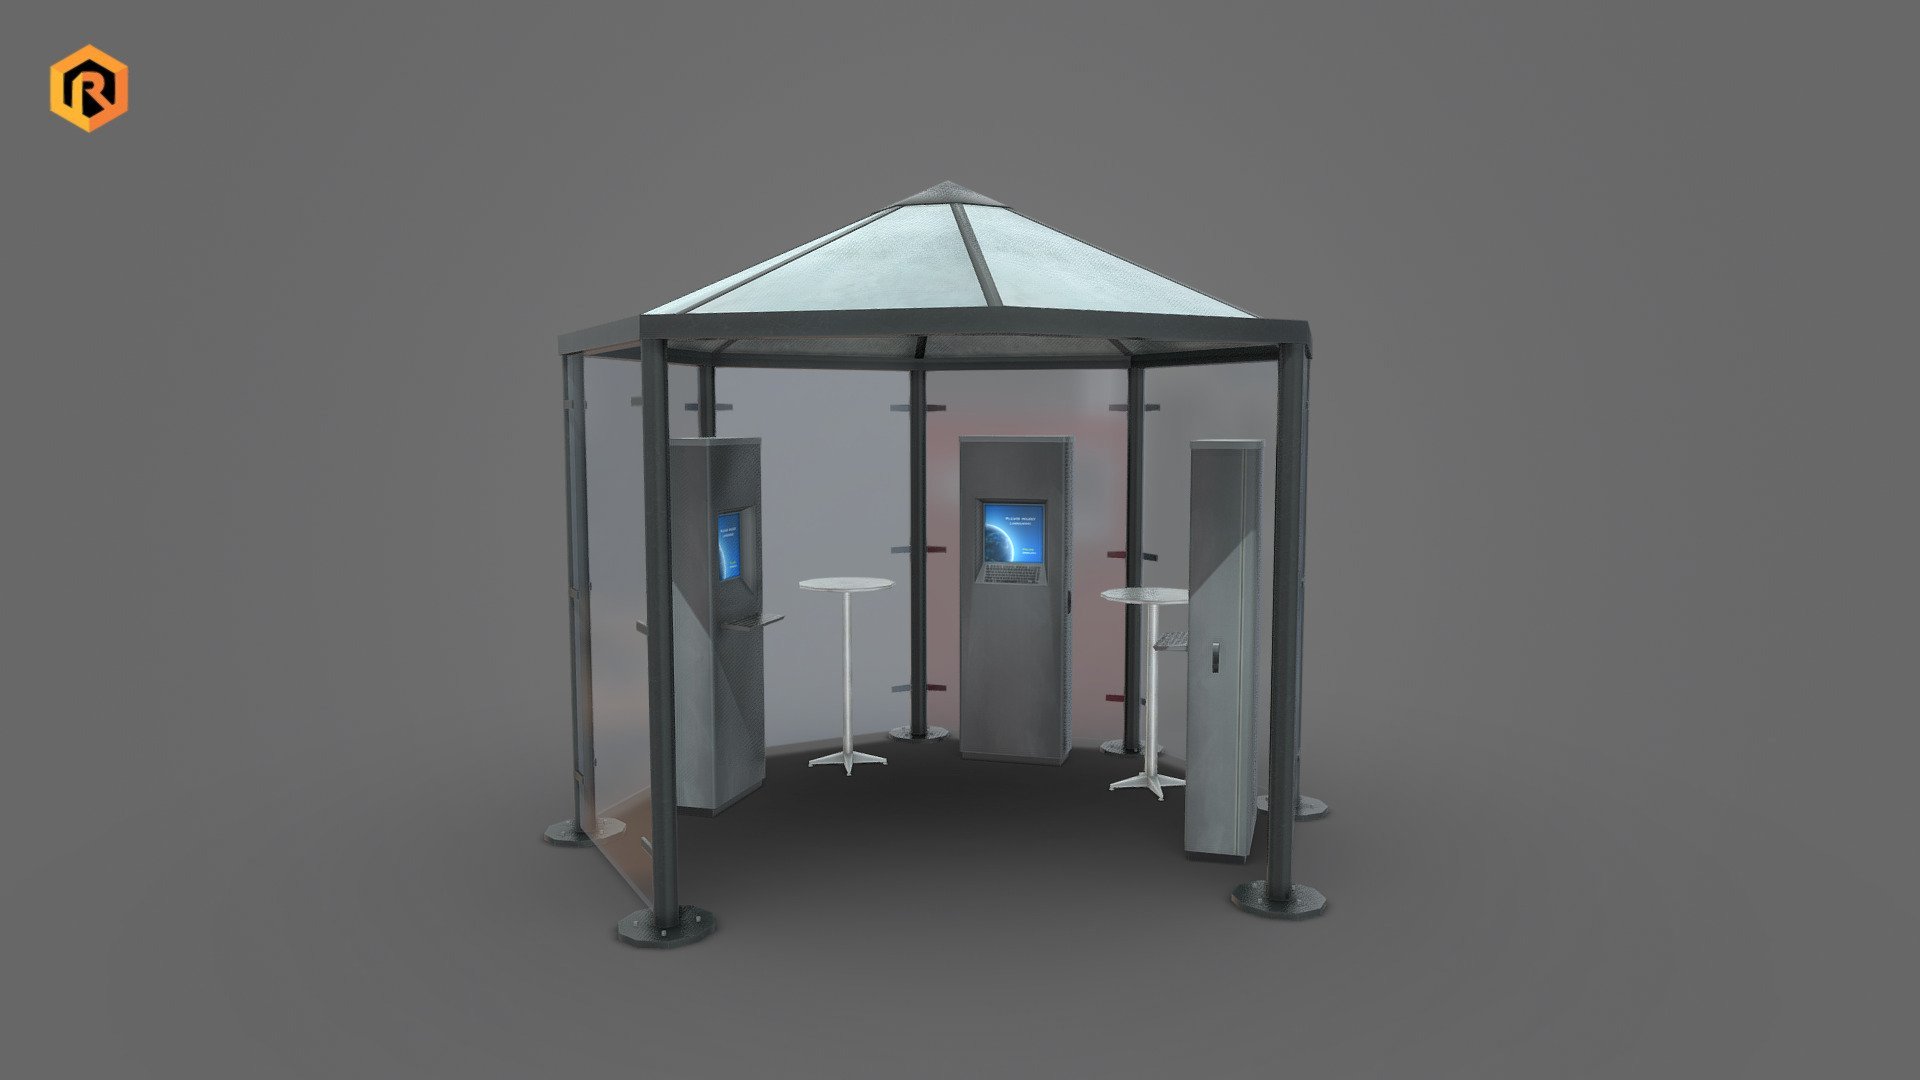 Low-poly 3D model of Multimedia Kiosk.

It is best for use in games and other VR / AR, real-time applications such as Unity or Unreal Engine.  

It can also be rendered in Blender (ex Cycles) or Vray as the model is equipped with proper textures.    

Technical details:  




4096x Diffuse and AO textures for main part  

1024x Diffuse and AO textures for glass  

2060 Triangles 

1414 Vertices  

Model is one mesh  

Model completely unwrapped   

All nodes, materials and textures are appropriately named  

Lot of additional file formats included (Blender, Unity, Maya etc.)  

More file formats are available in additional zip file on product page.

Please feel free to contact me if you have any questions or need any support for this asset.

Support e-mail: support@rescue3d.com - Multimedia Kiosk - Buy Royalty Free 3D model by Rescue3D Assets (@rescue3d) 3d model